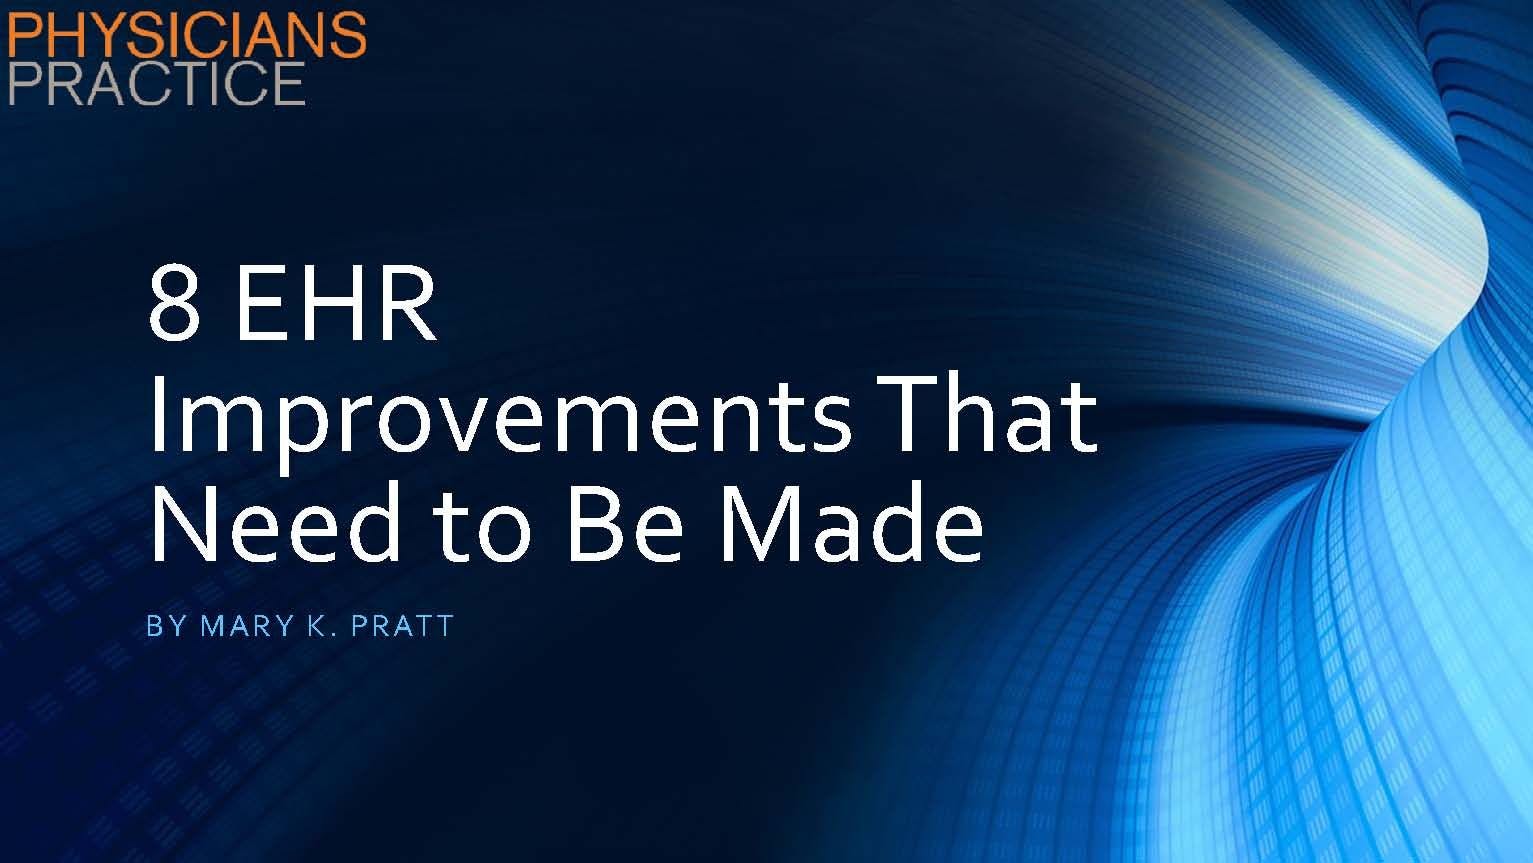 8 EHR Improvements That Need to Be Made